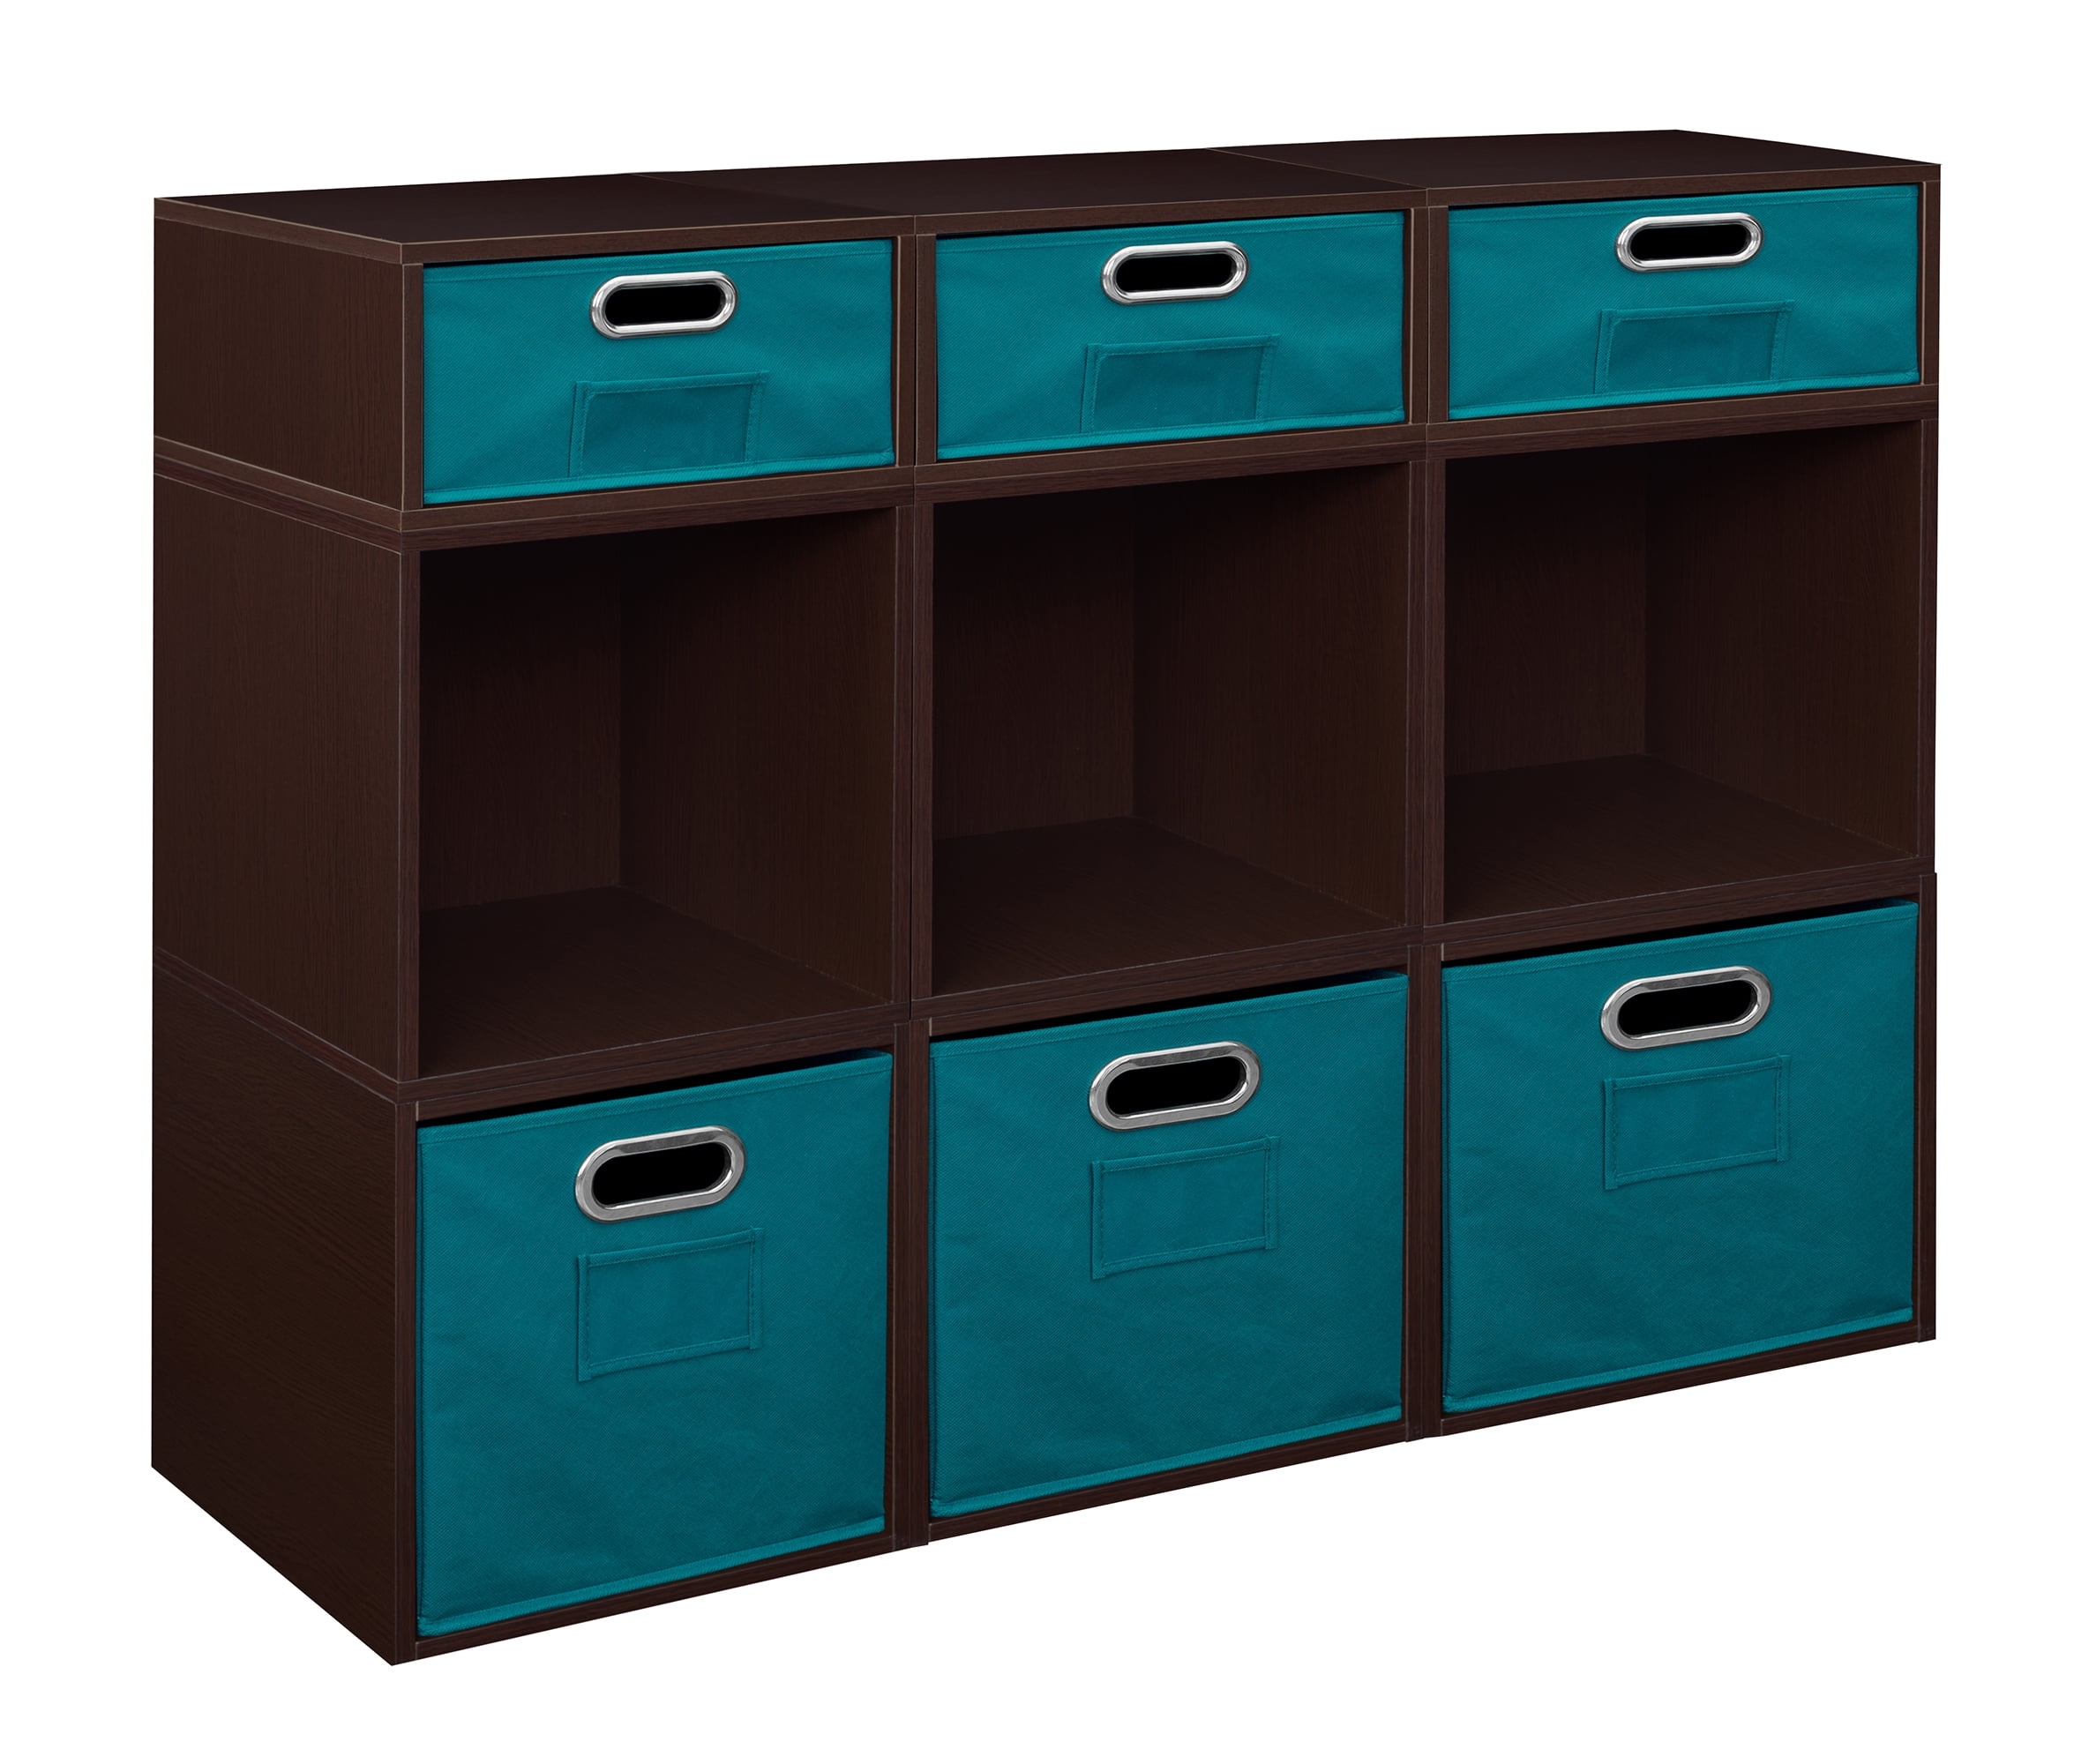 Niche Cubo Storage Set- 6 Full Cubes/3 Half Cubes with Foldable Storage ...